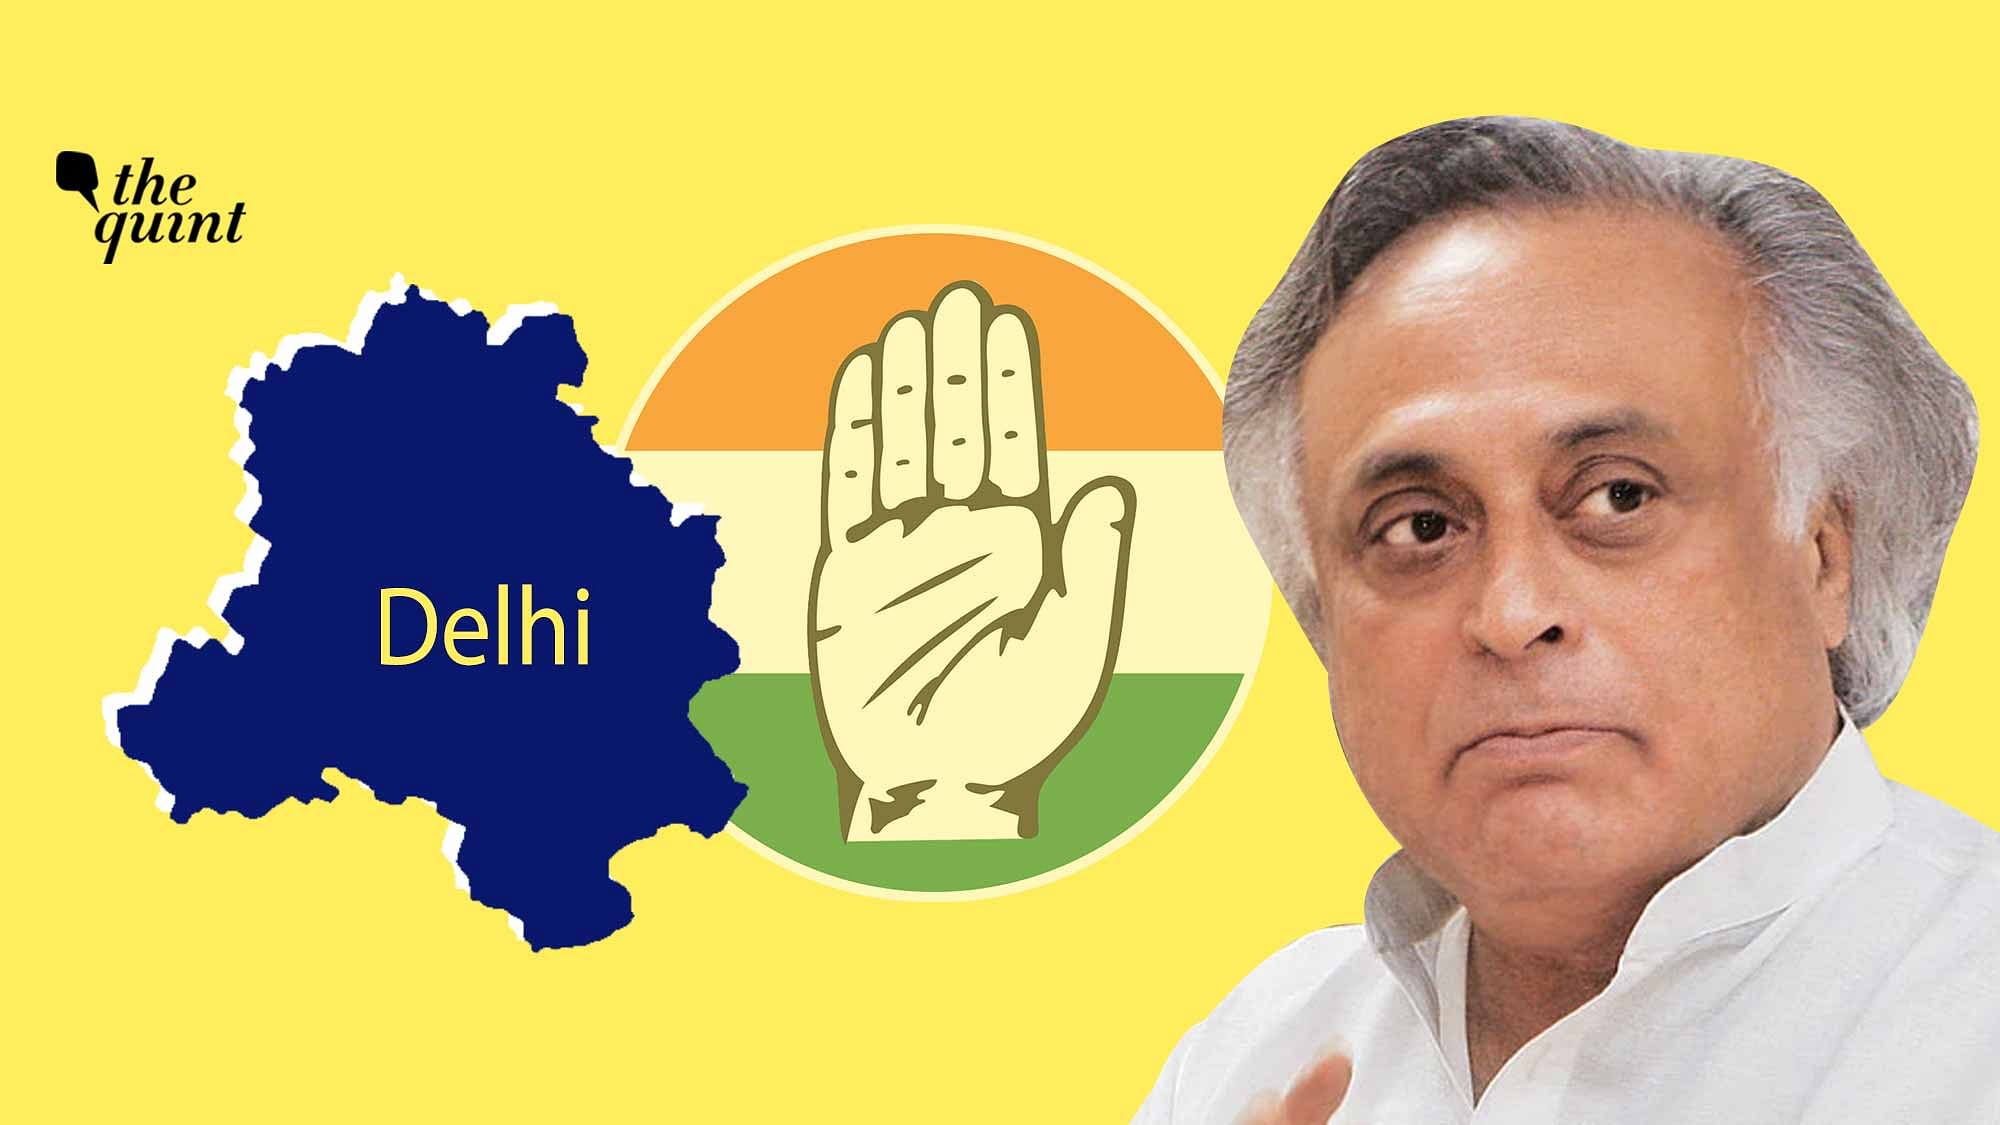 Before the Delhi elections, and shortly after the release of his latest book, The Quint caught up with senior Congress leader and Rajya Sabha MP Jairam Ramesh.